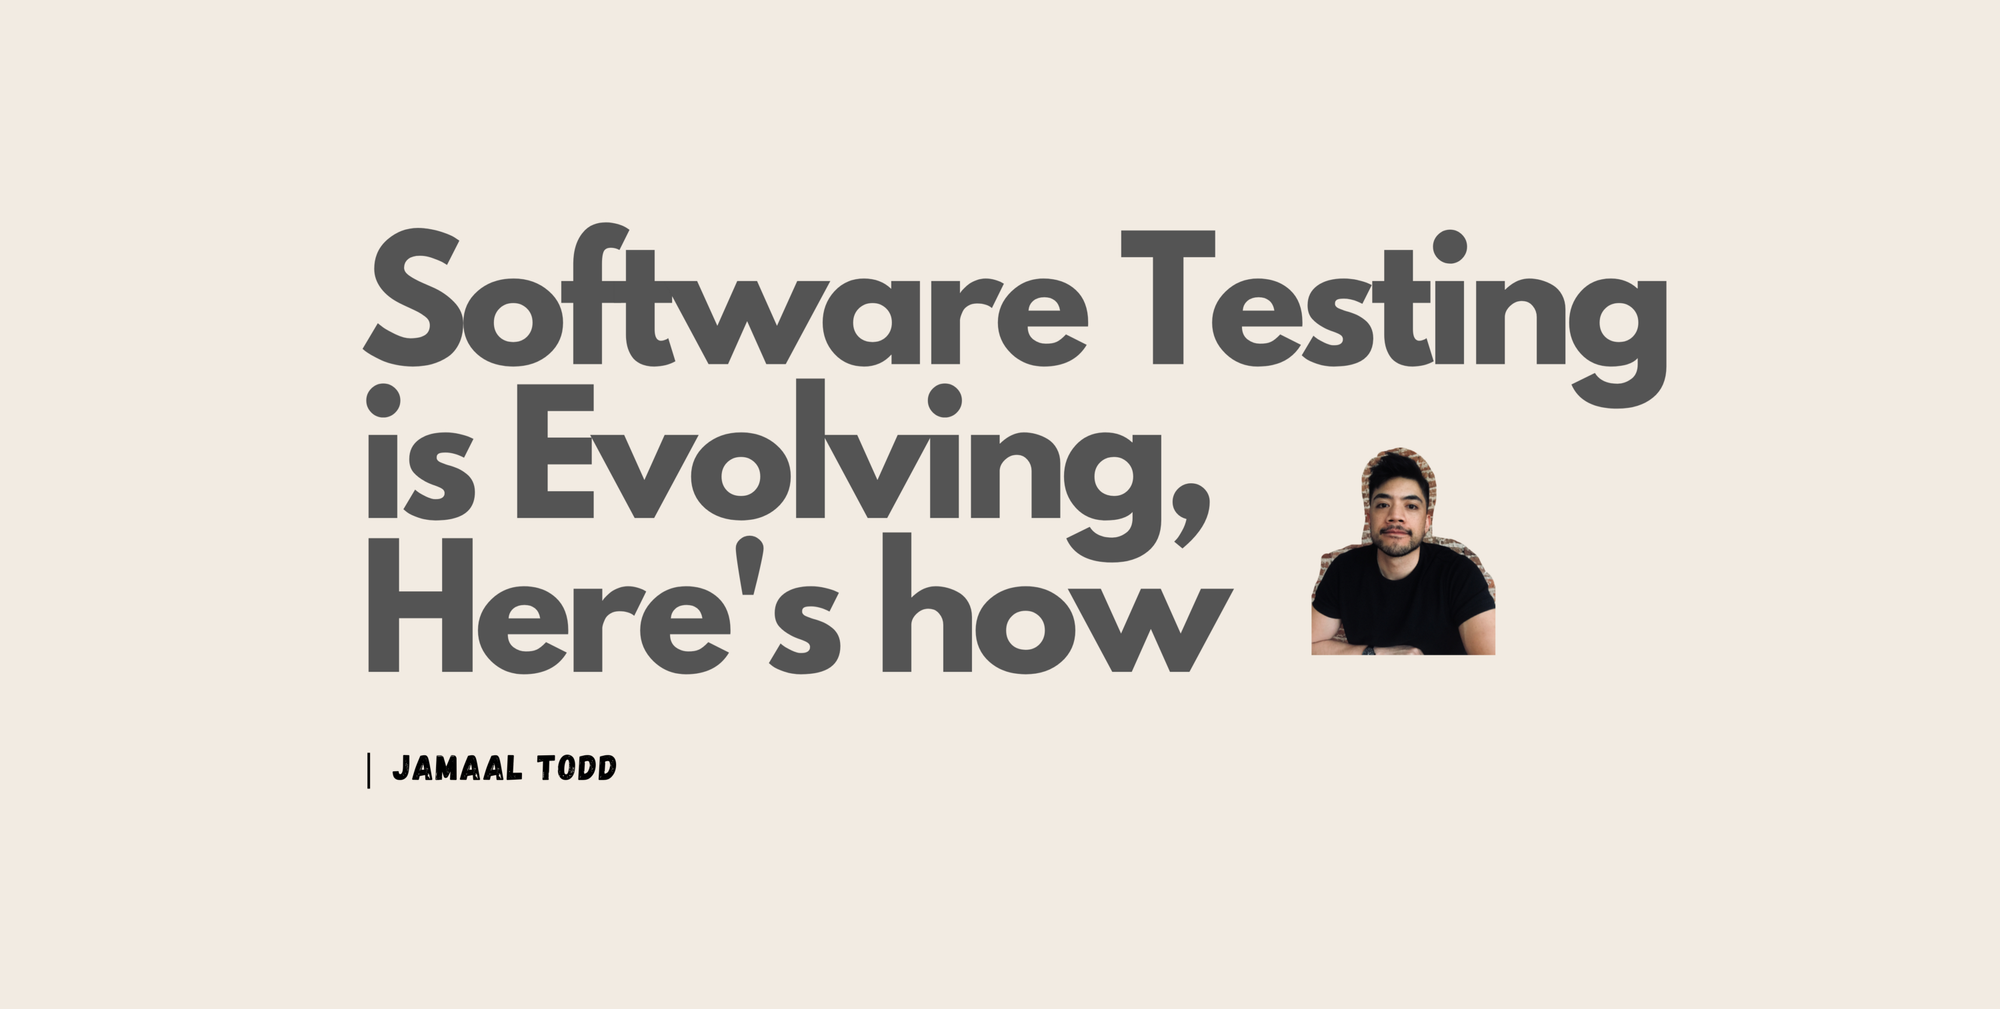 Re-Post: "Software Testing is Evolving, Here's How"